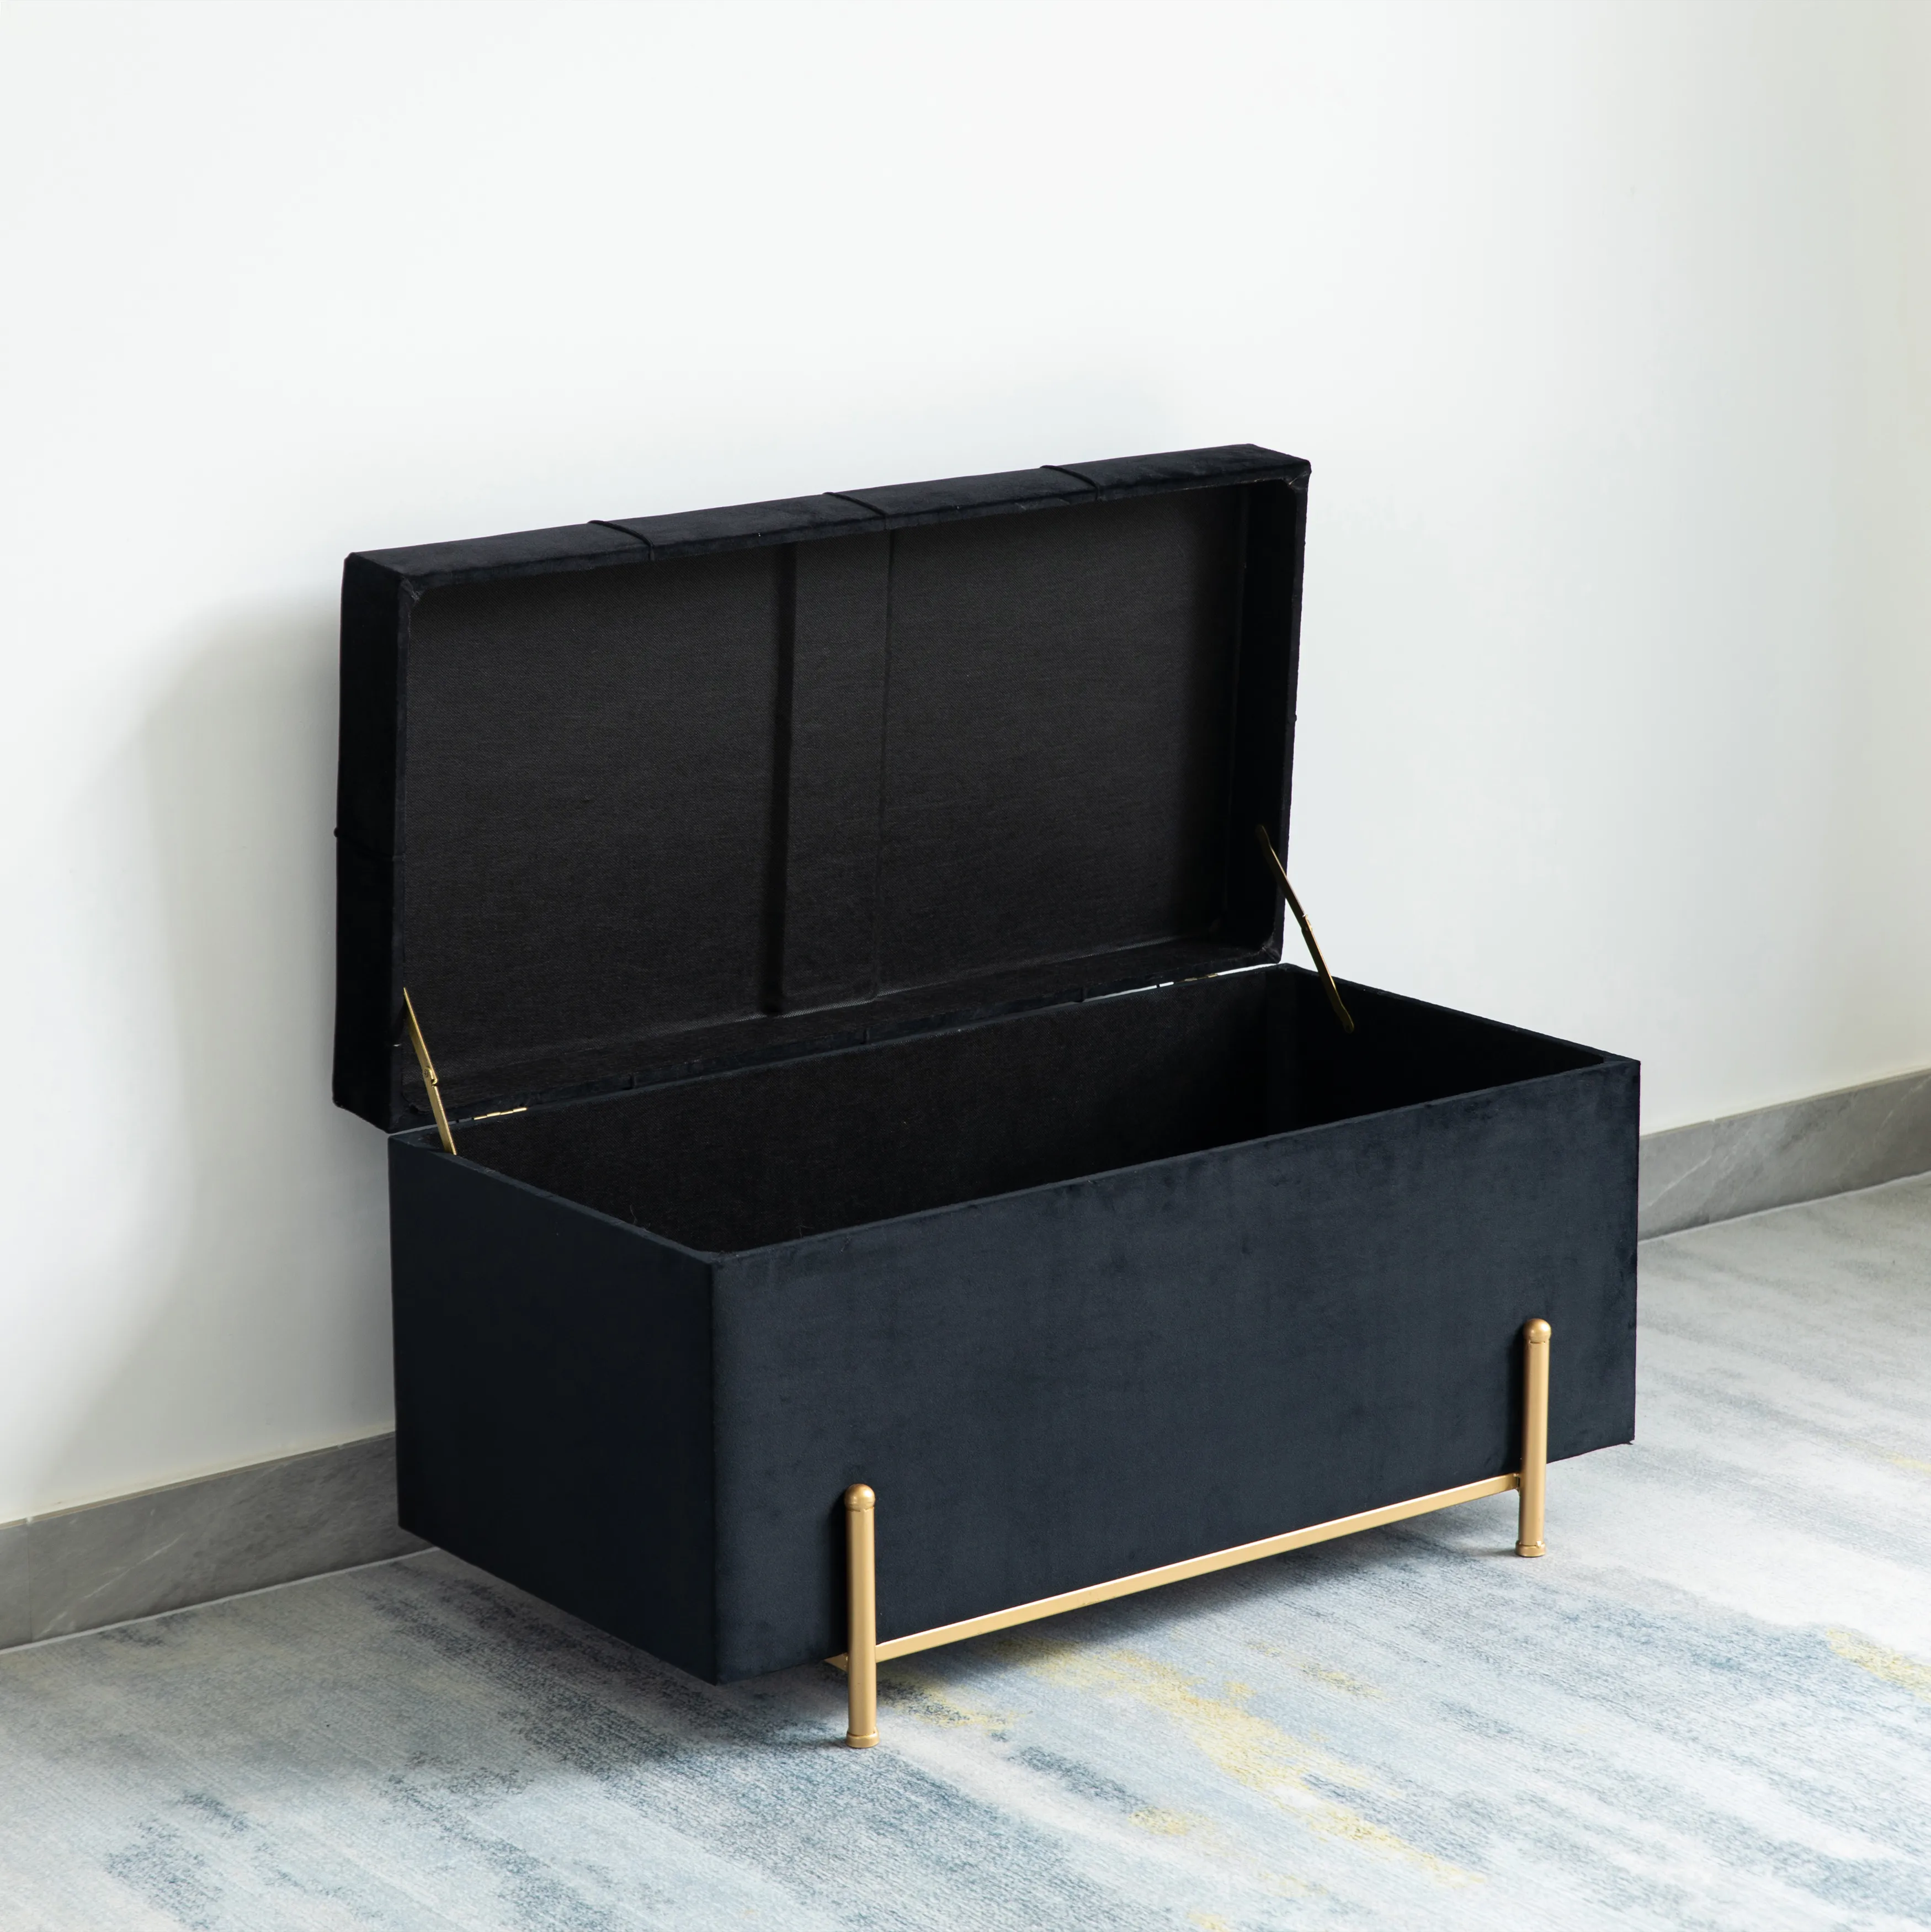 Large Rectangle Velvet Storage Ottoman Stool Box with Golden Legs | Decorative Sitting Bench for Living Room Home Decor with Cylindrical Golden Support (Black)